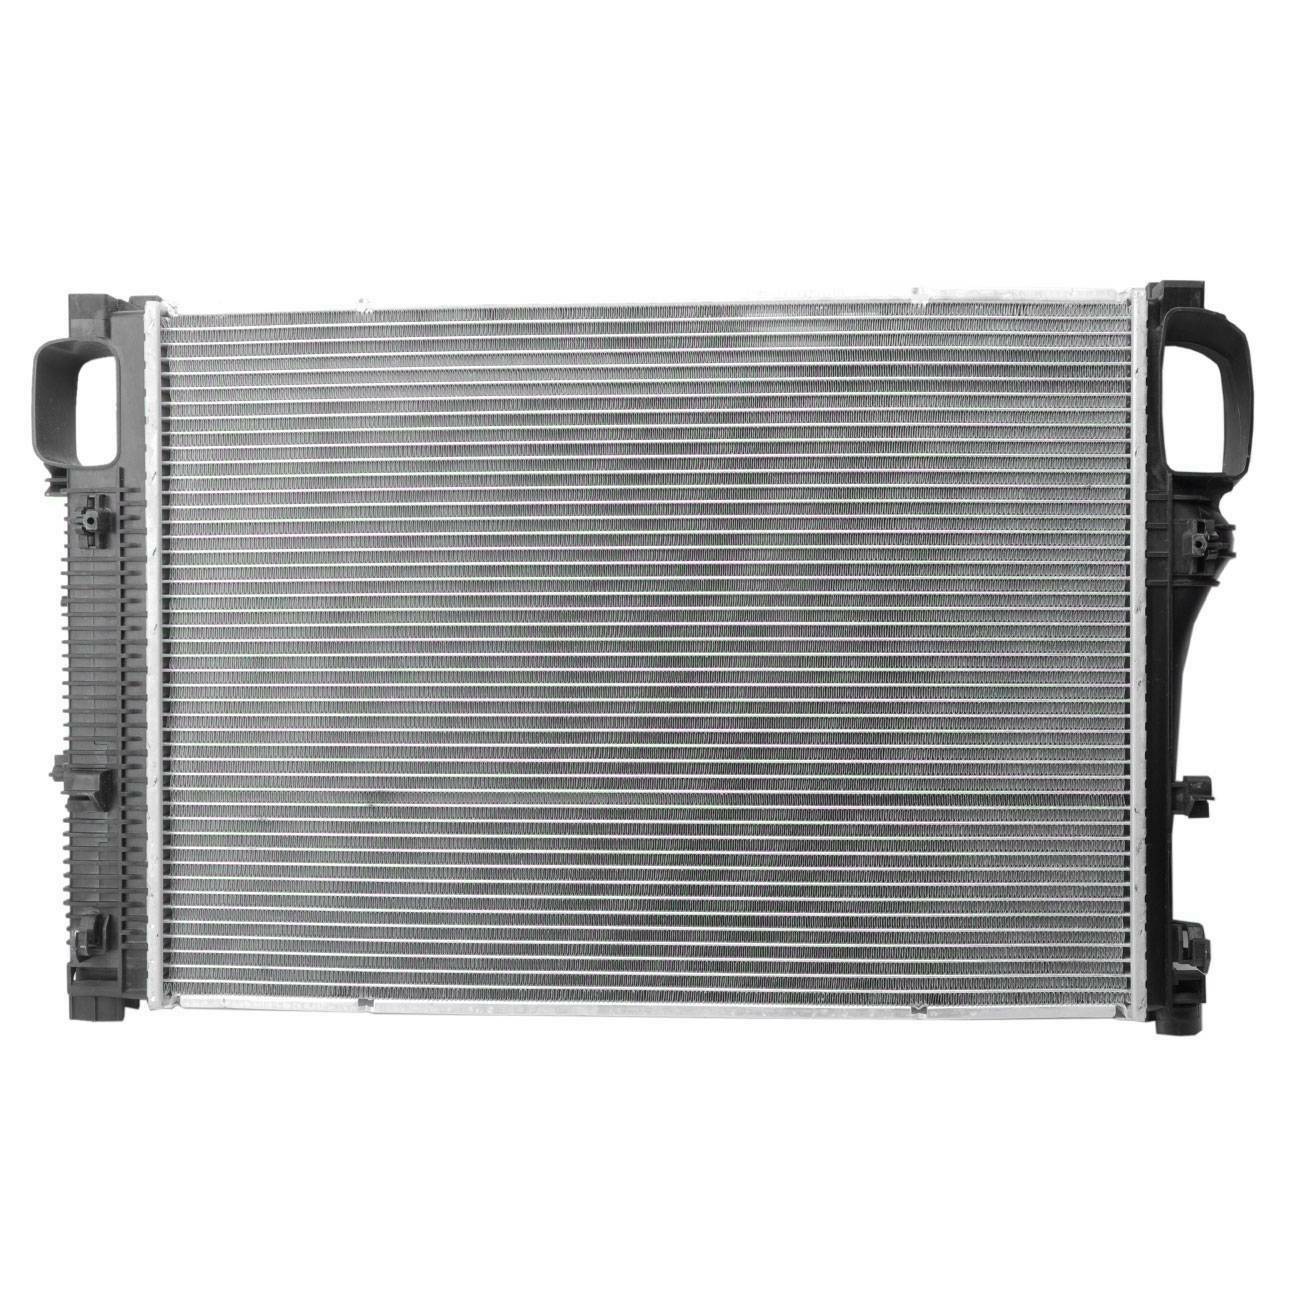 Engine Cooling Radiator for Mercedes W221 C216 S350 S400 CL500 A2215002603 German Made